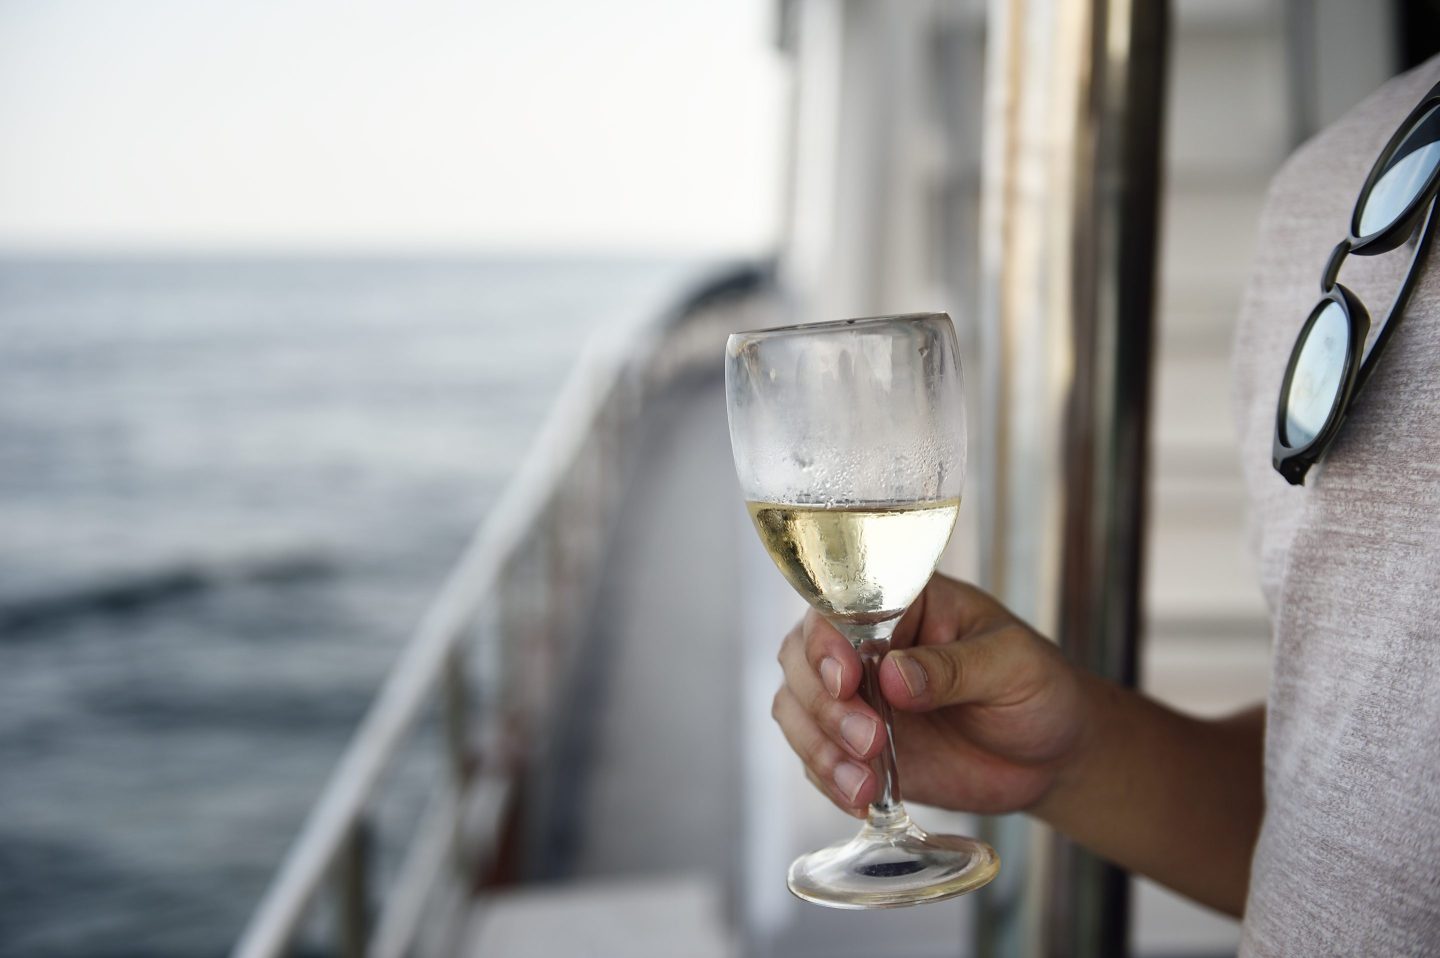 Yacht and glass of wine